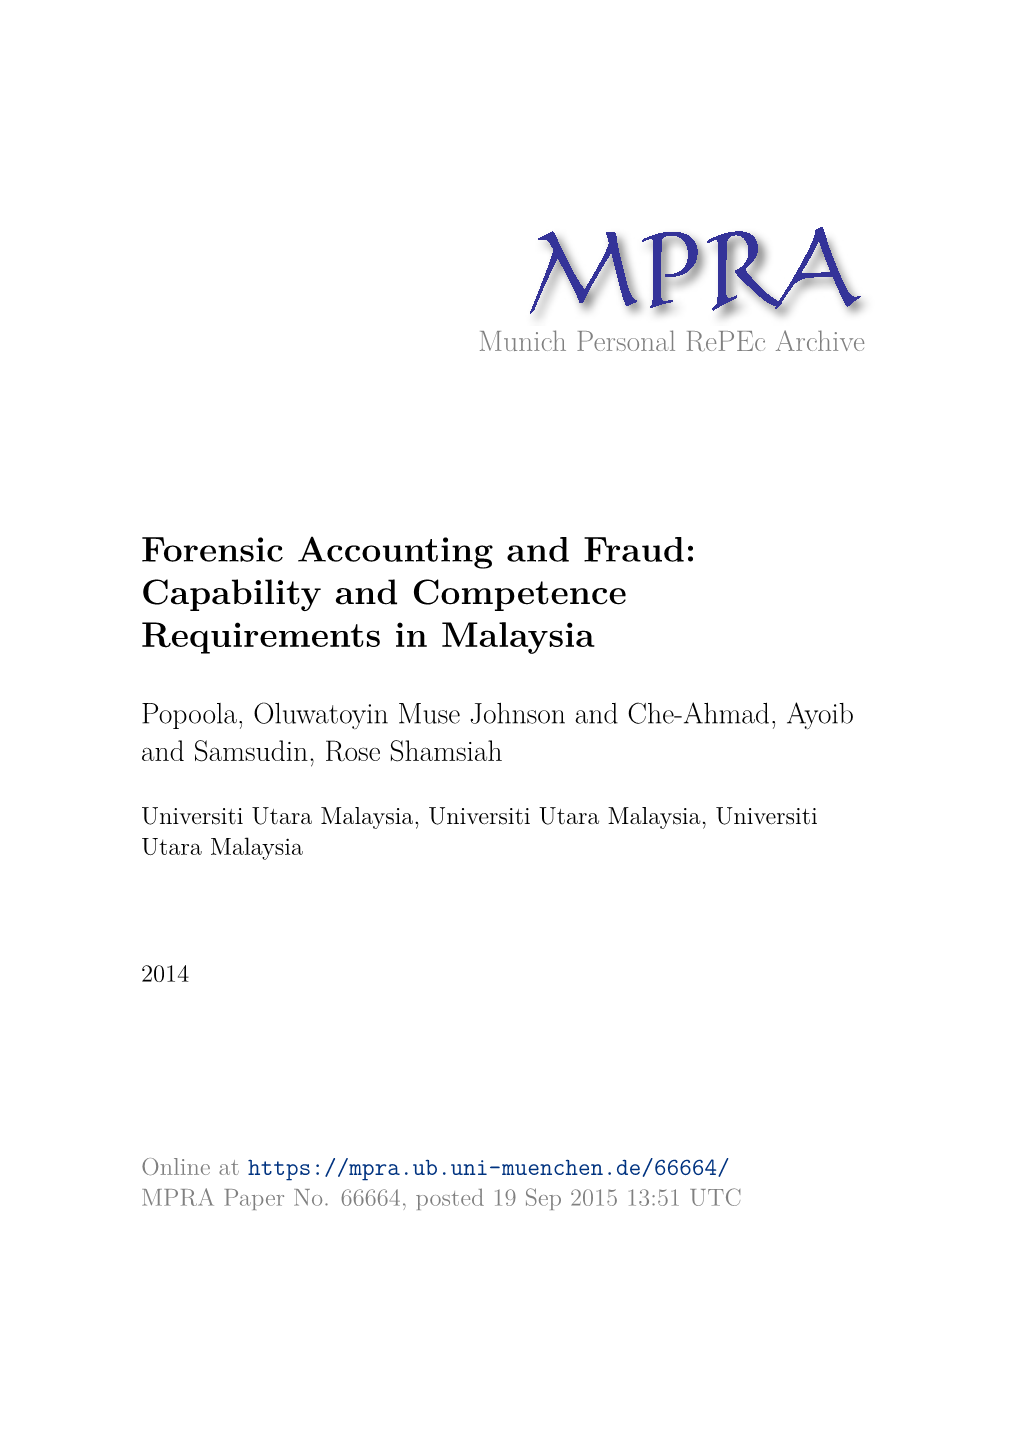 Forensic Accounting and Fraud: Capability and Competence Requirements in Malaysia